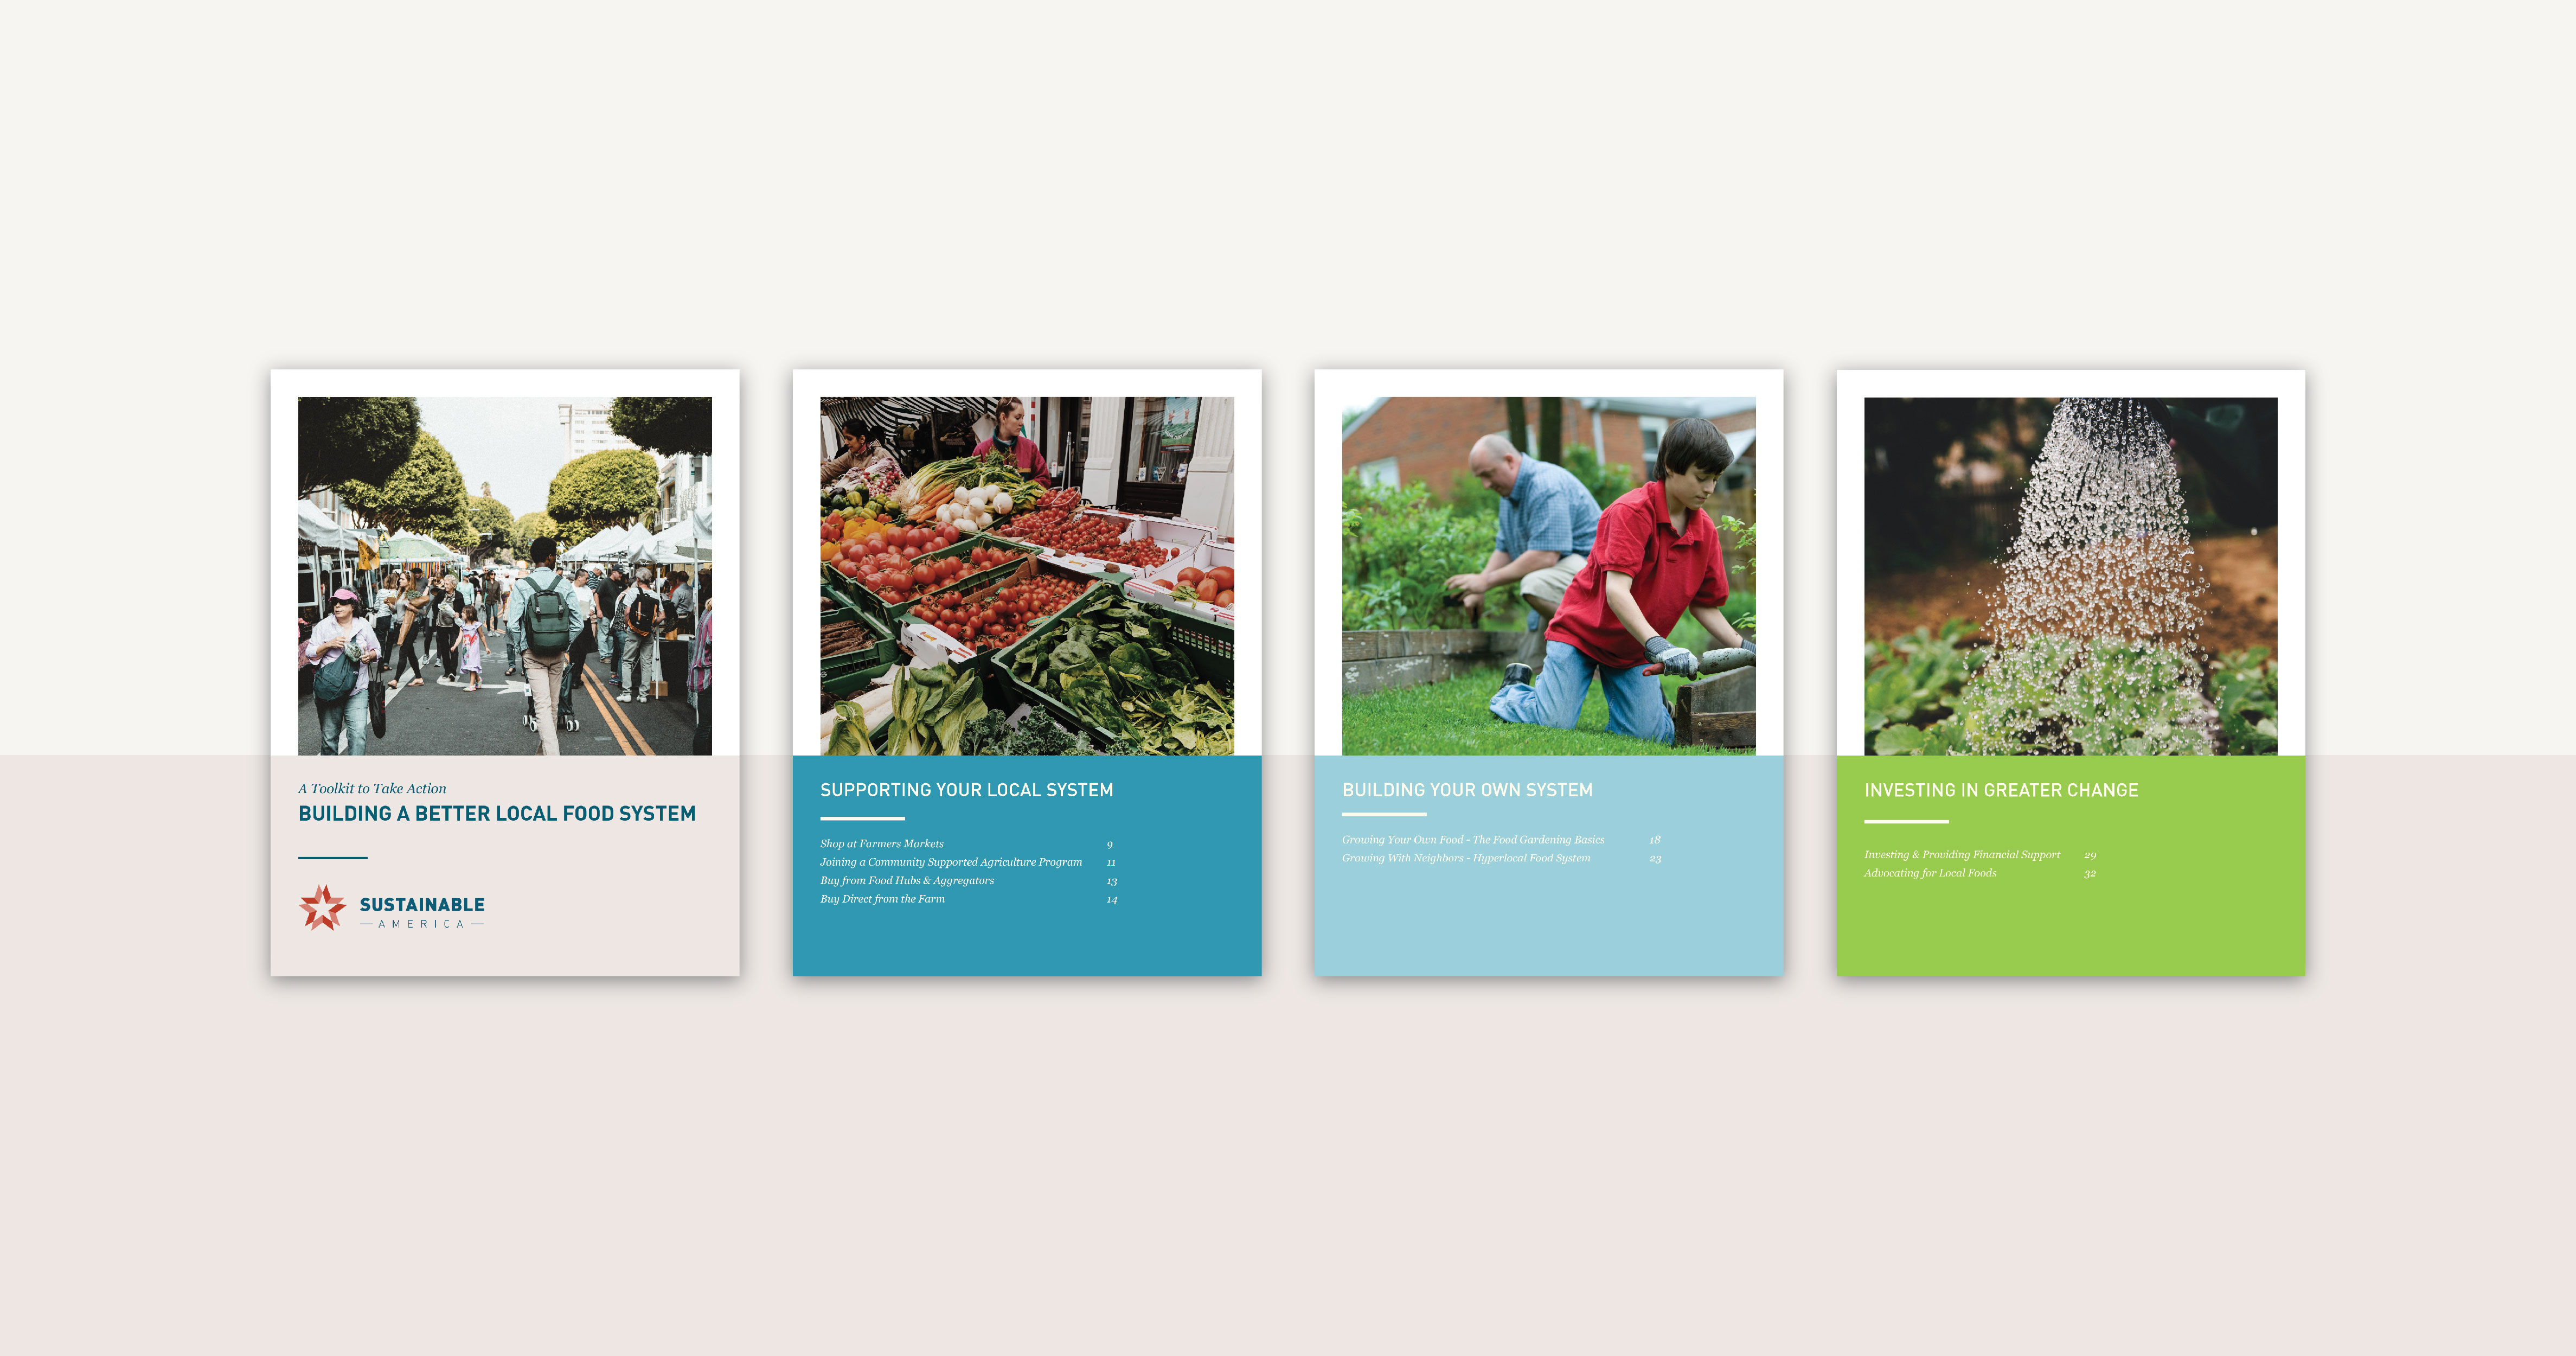 A Toolkit for Strengthening Your Local Food System